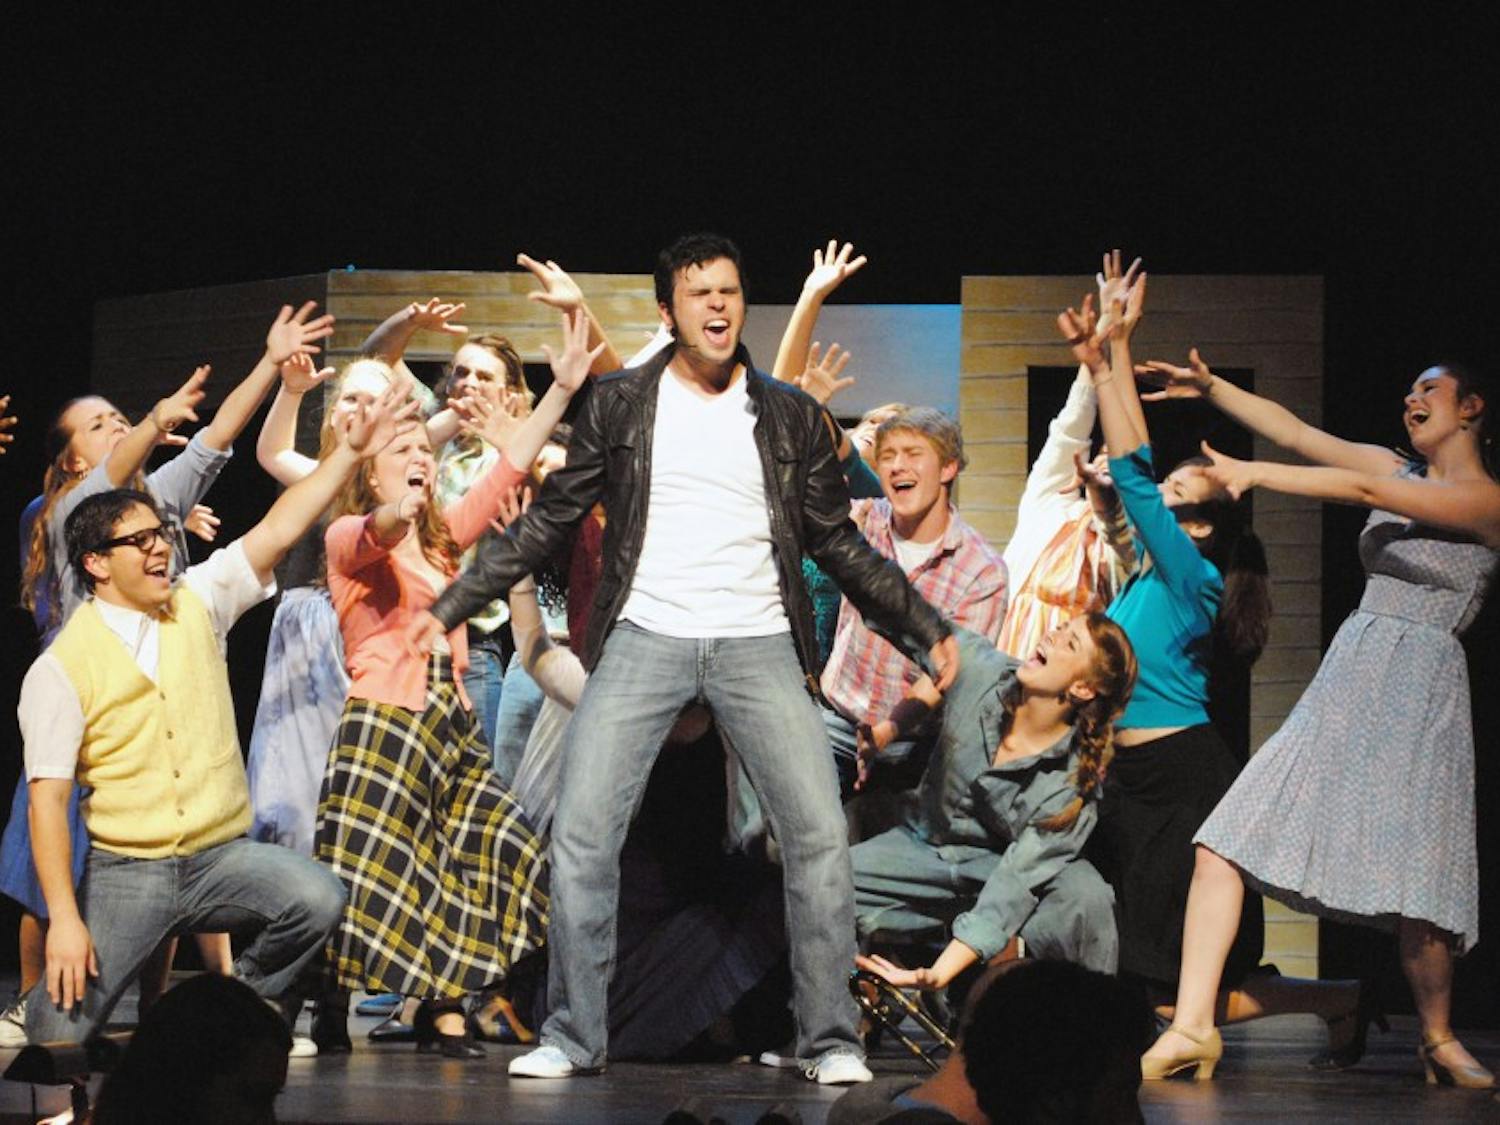 Photo: Pauper Players to rock with Elvis (Mary Koenig)